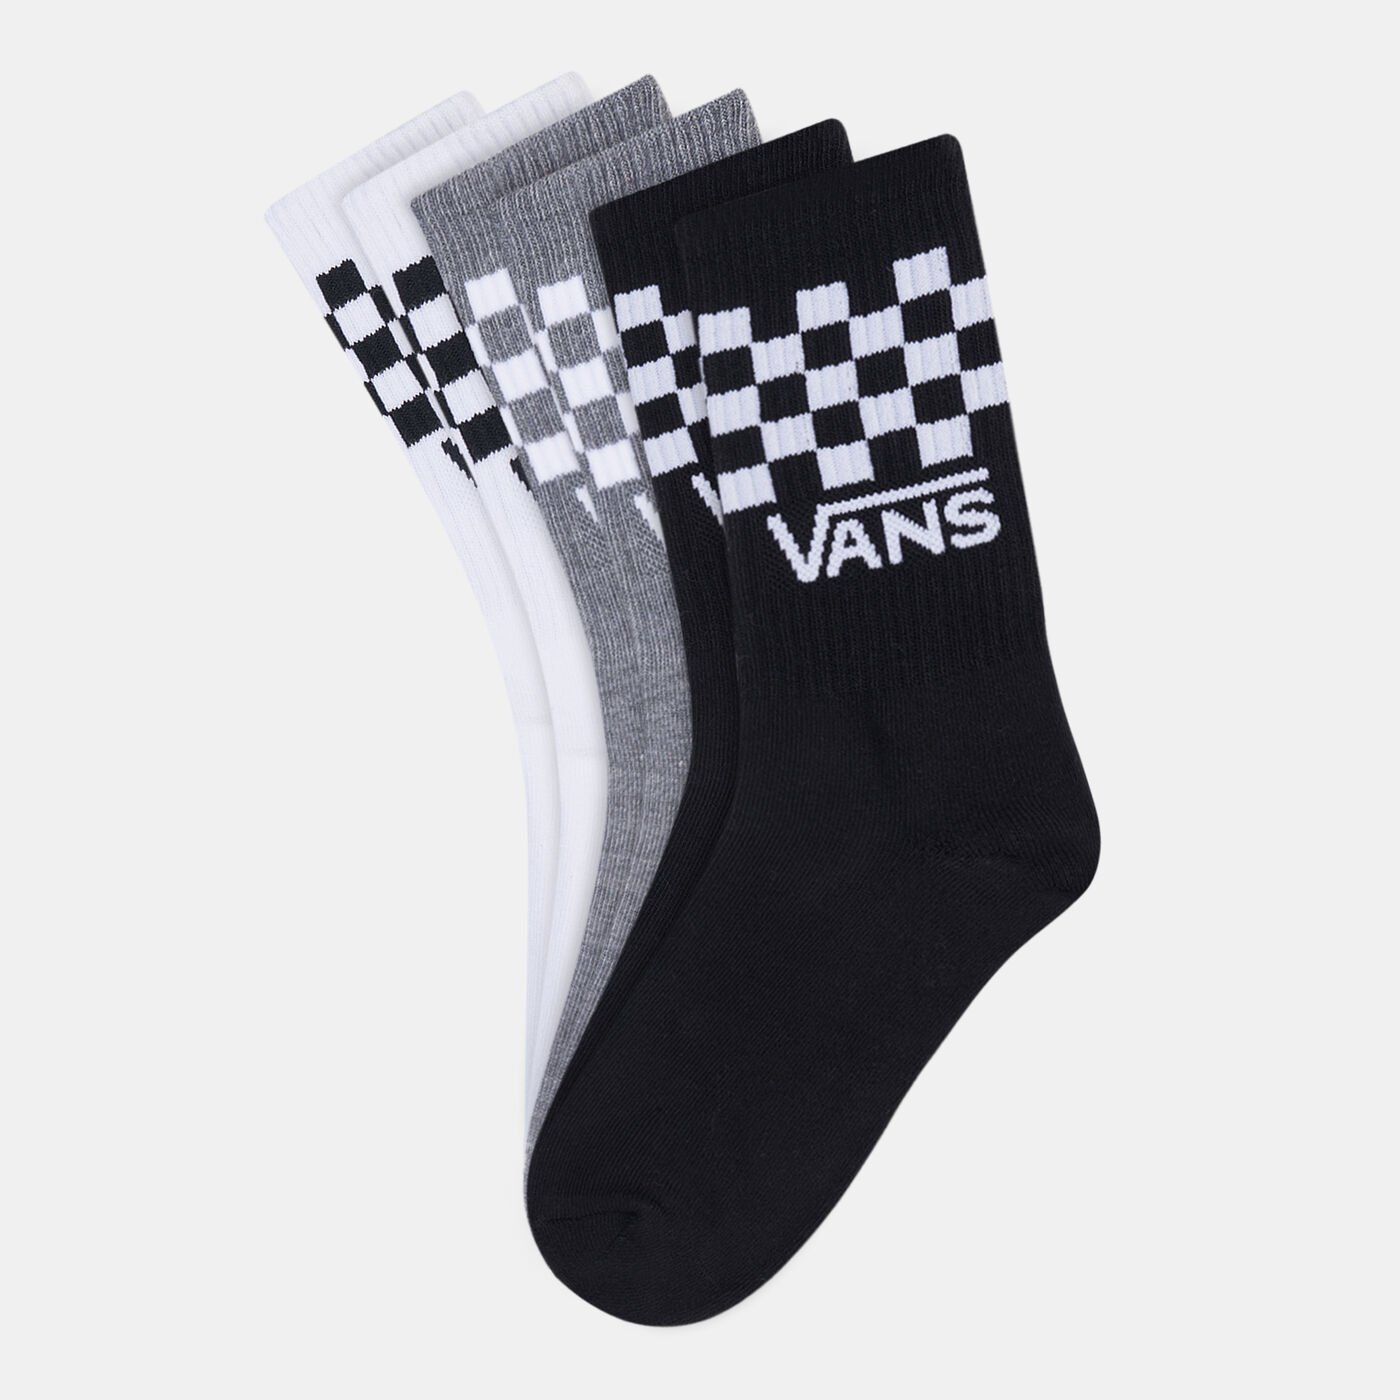 Kids' Checkerboard Crew Socks - 3 Pack (Younger Kids)